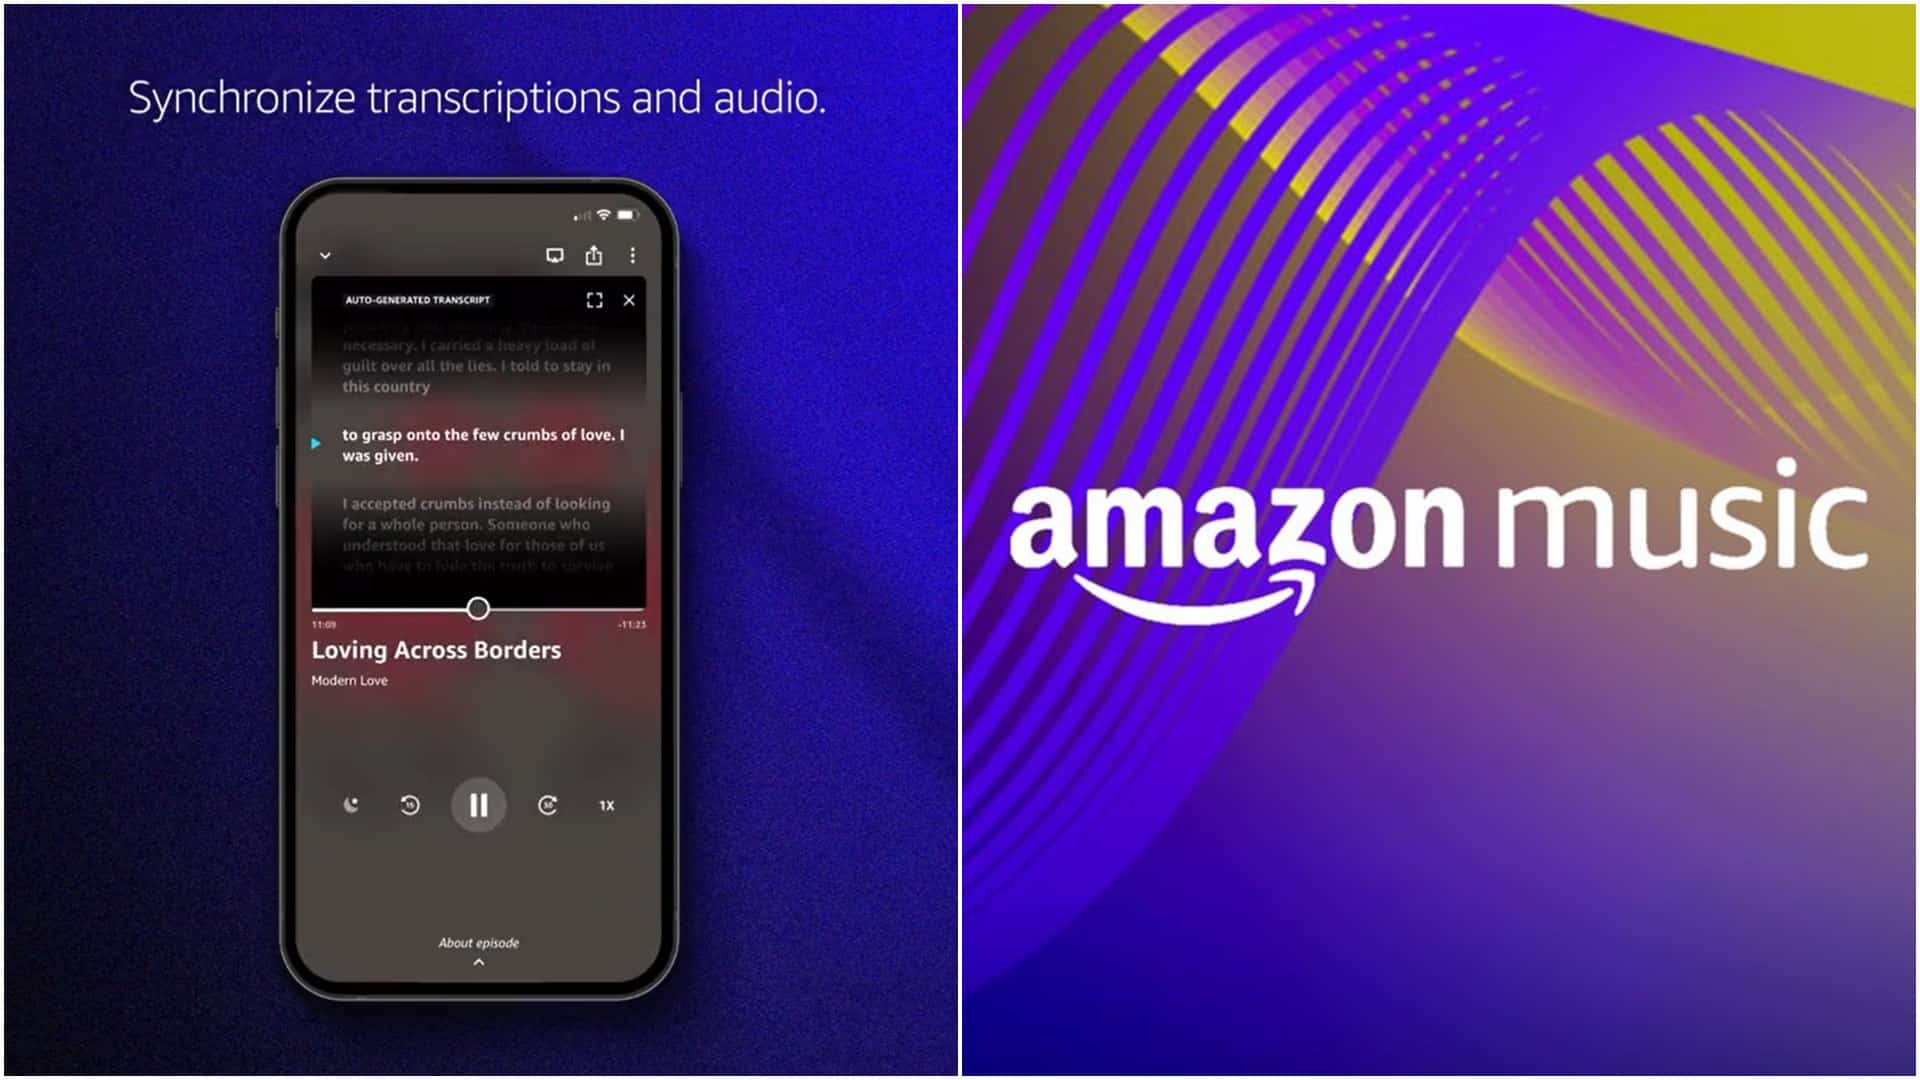 Amazon Music launches synced transcripts for select podcasts